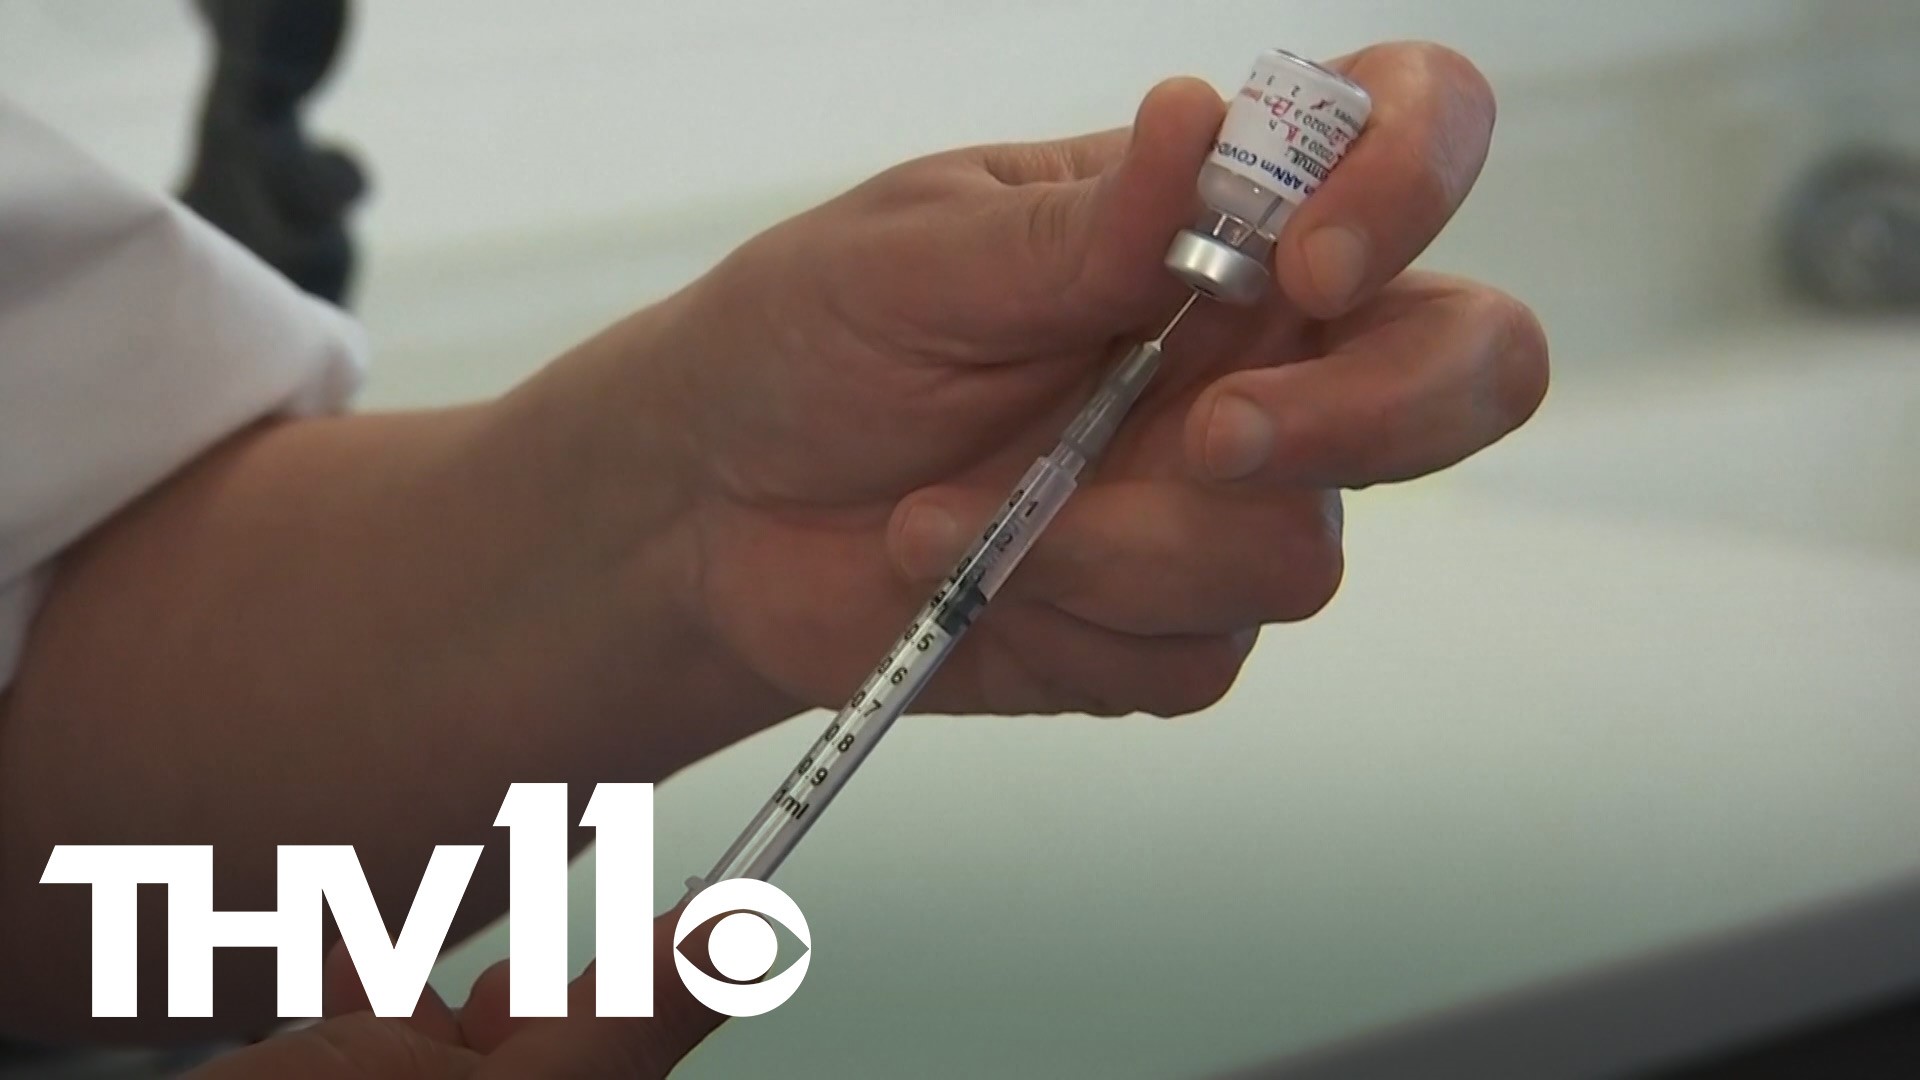 How long do we have immunity from COVID-19 vaccines, and do they only last 6 months? THV11's Verify team gets the answers.